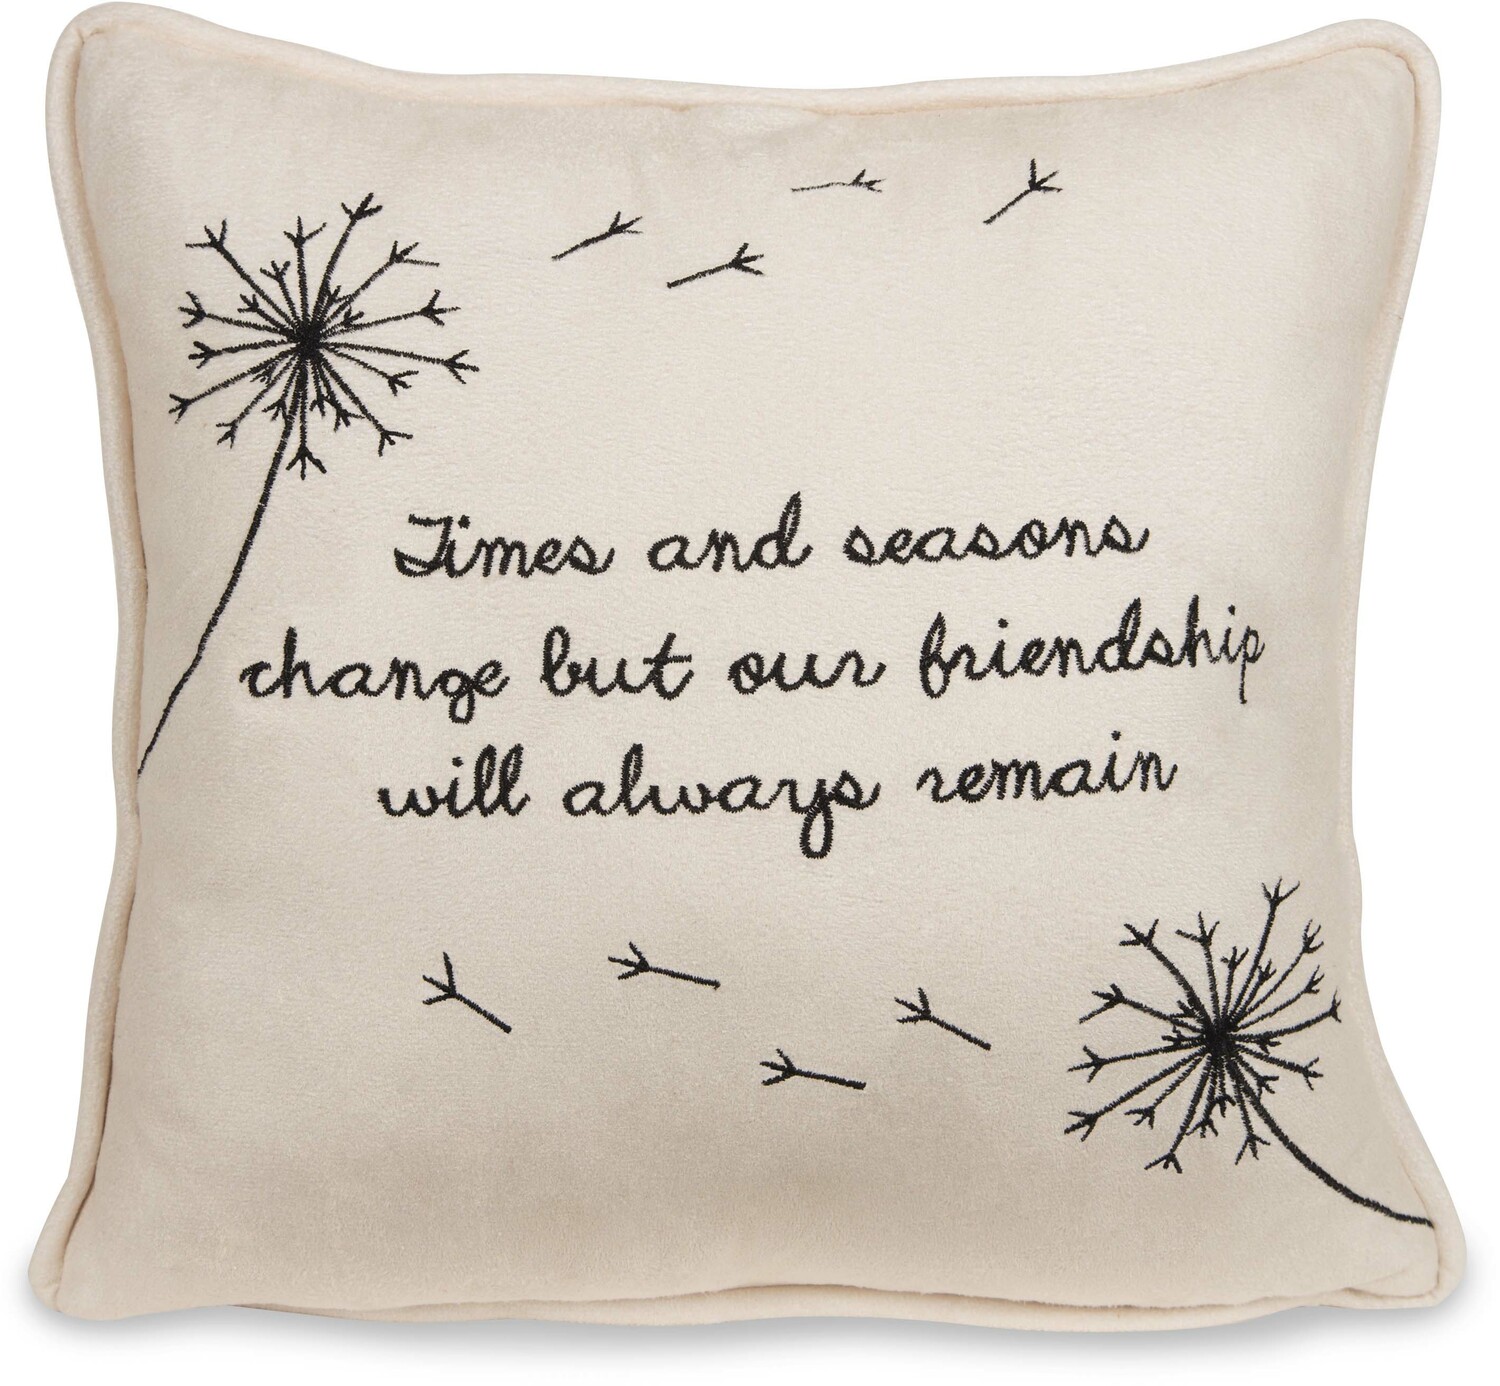 Friendship by Dandelion Wishes - Friendship - 12" Micro Suede Pillow